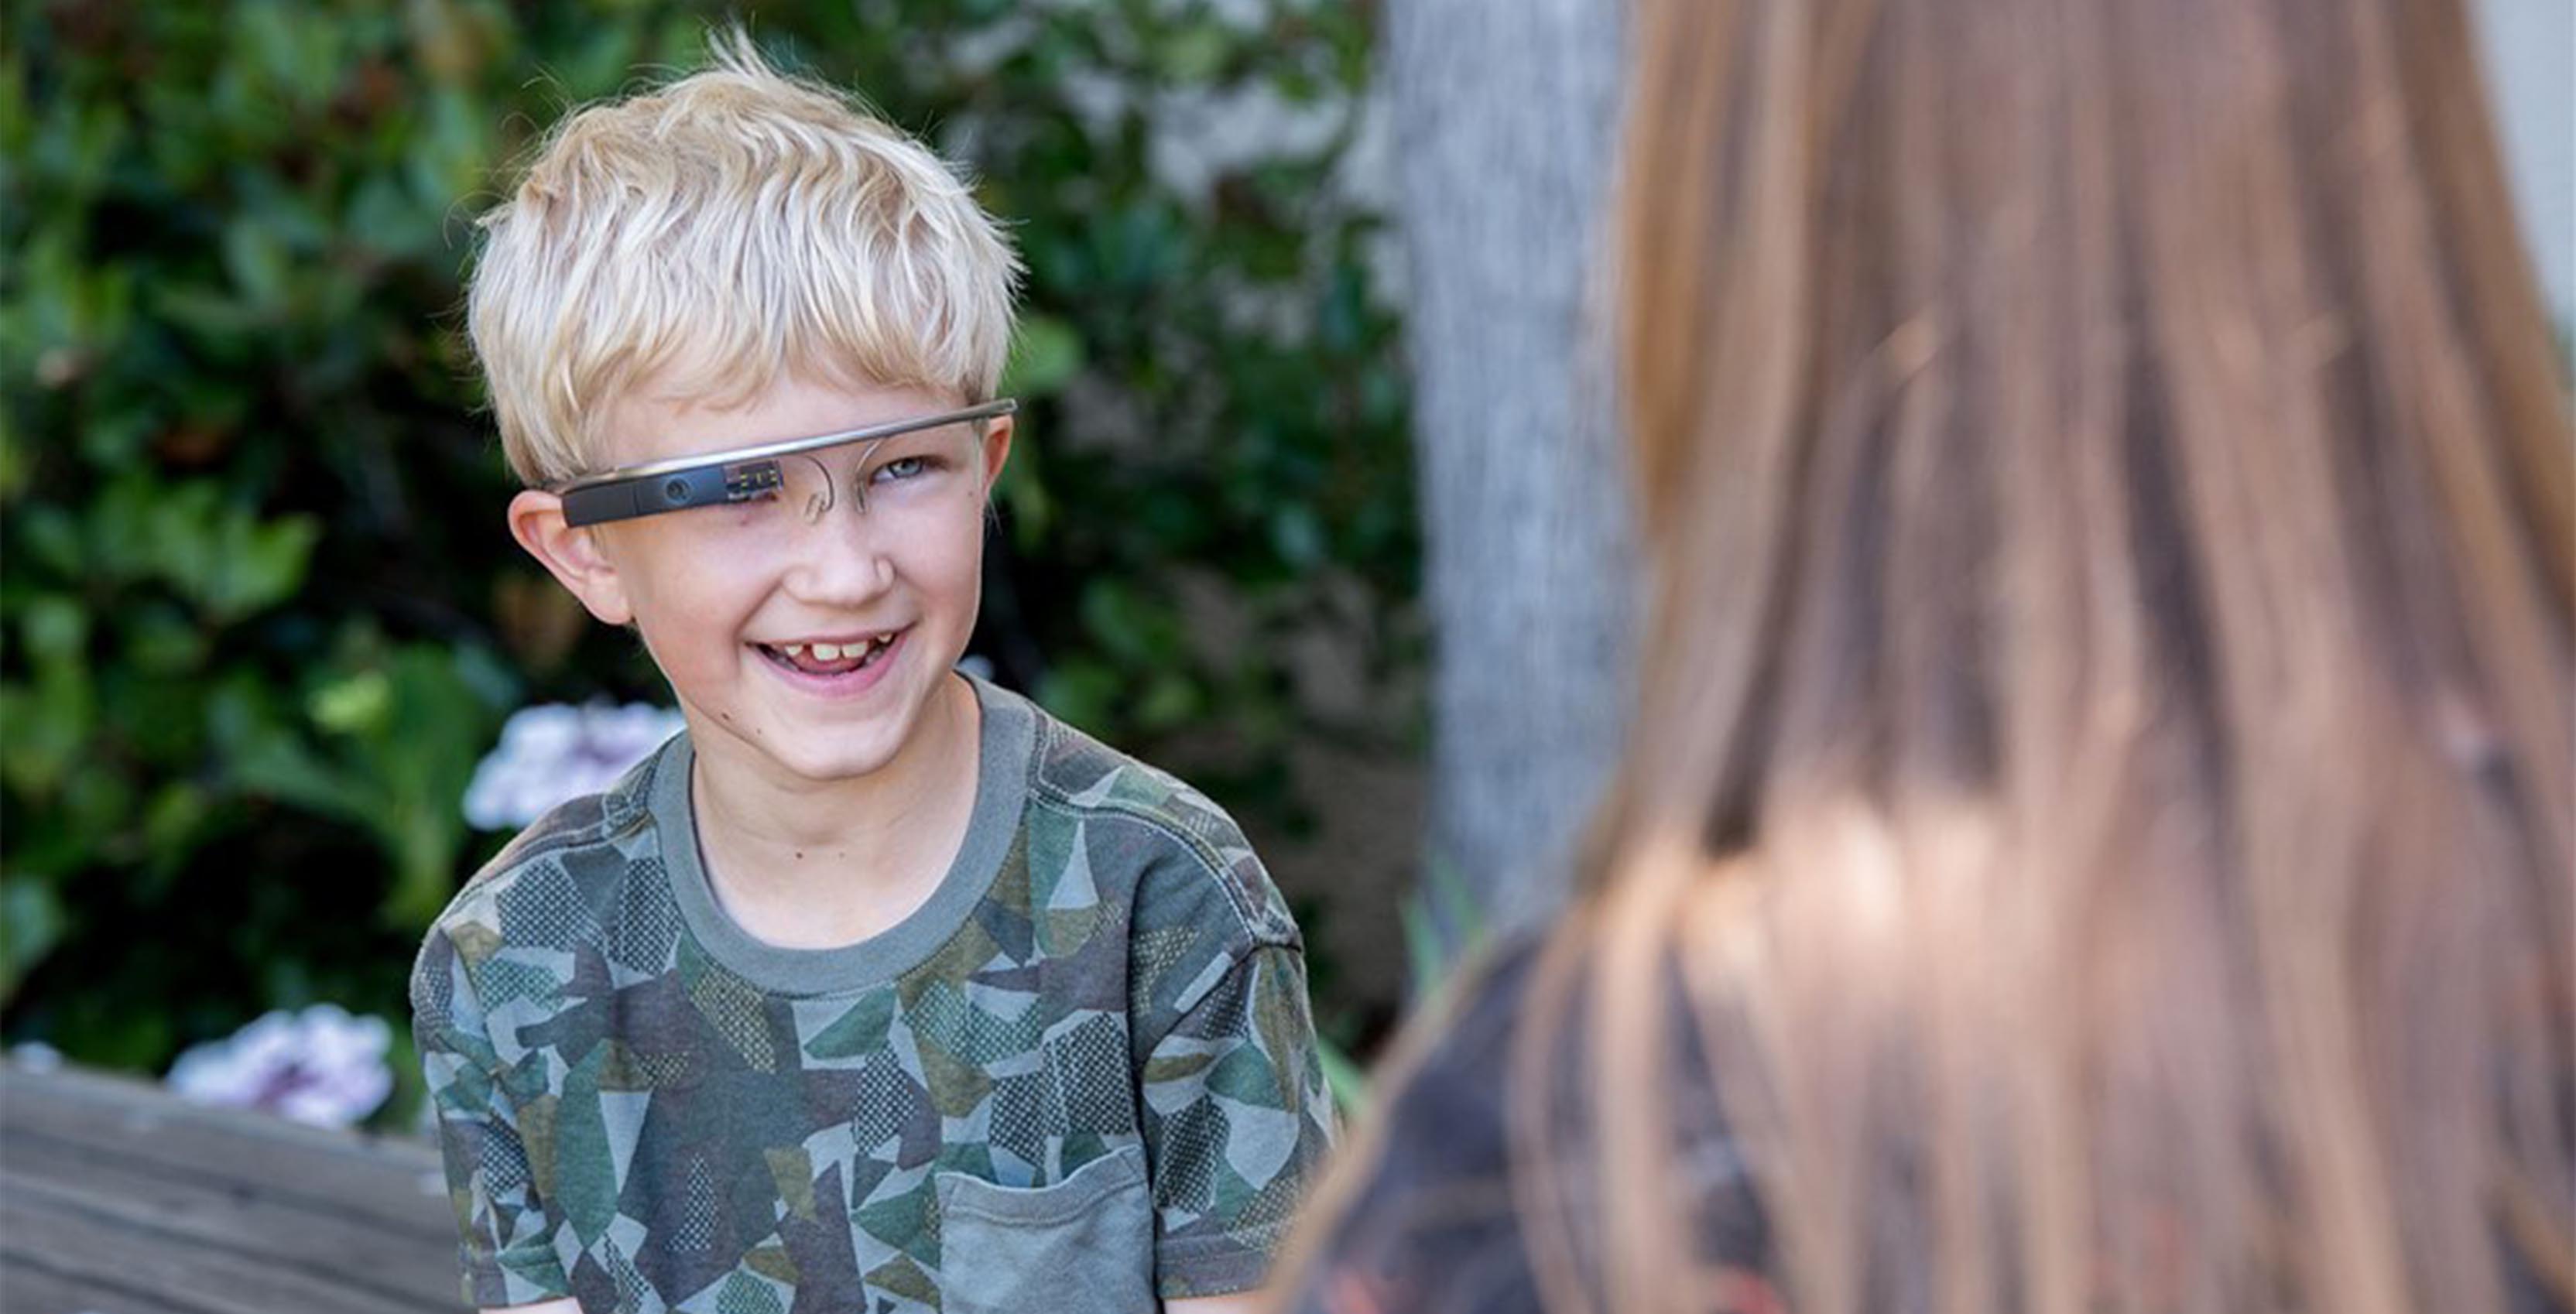 A child uses Google Glass experimental autism therapy